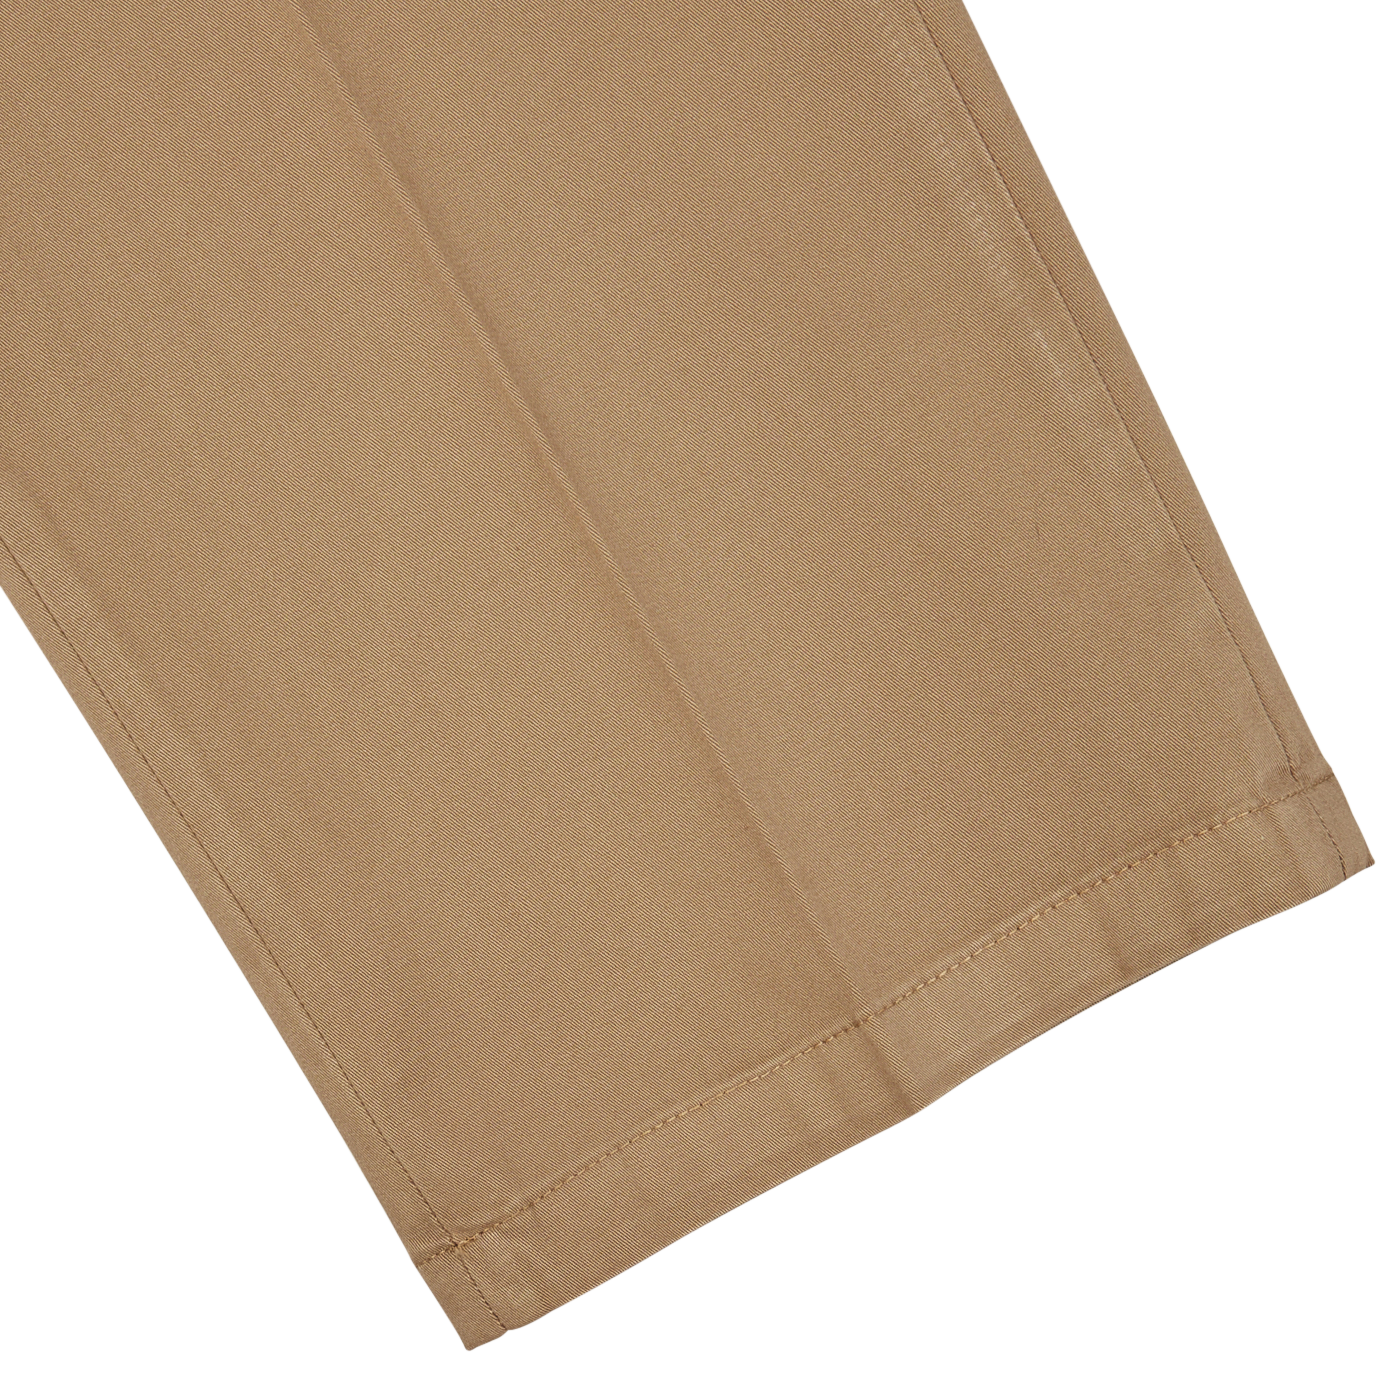 Boglioli's Tobacco Brown Washed Cotton Pleated Trousers with a stitched hem on a white background.